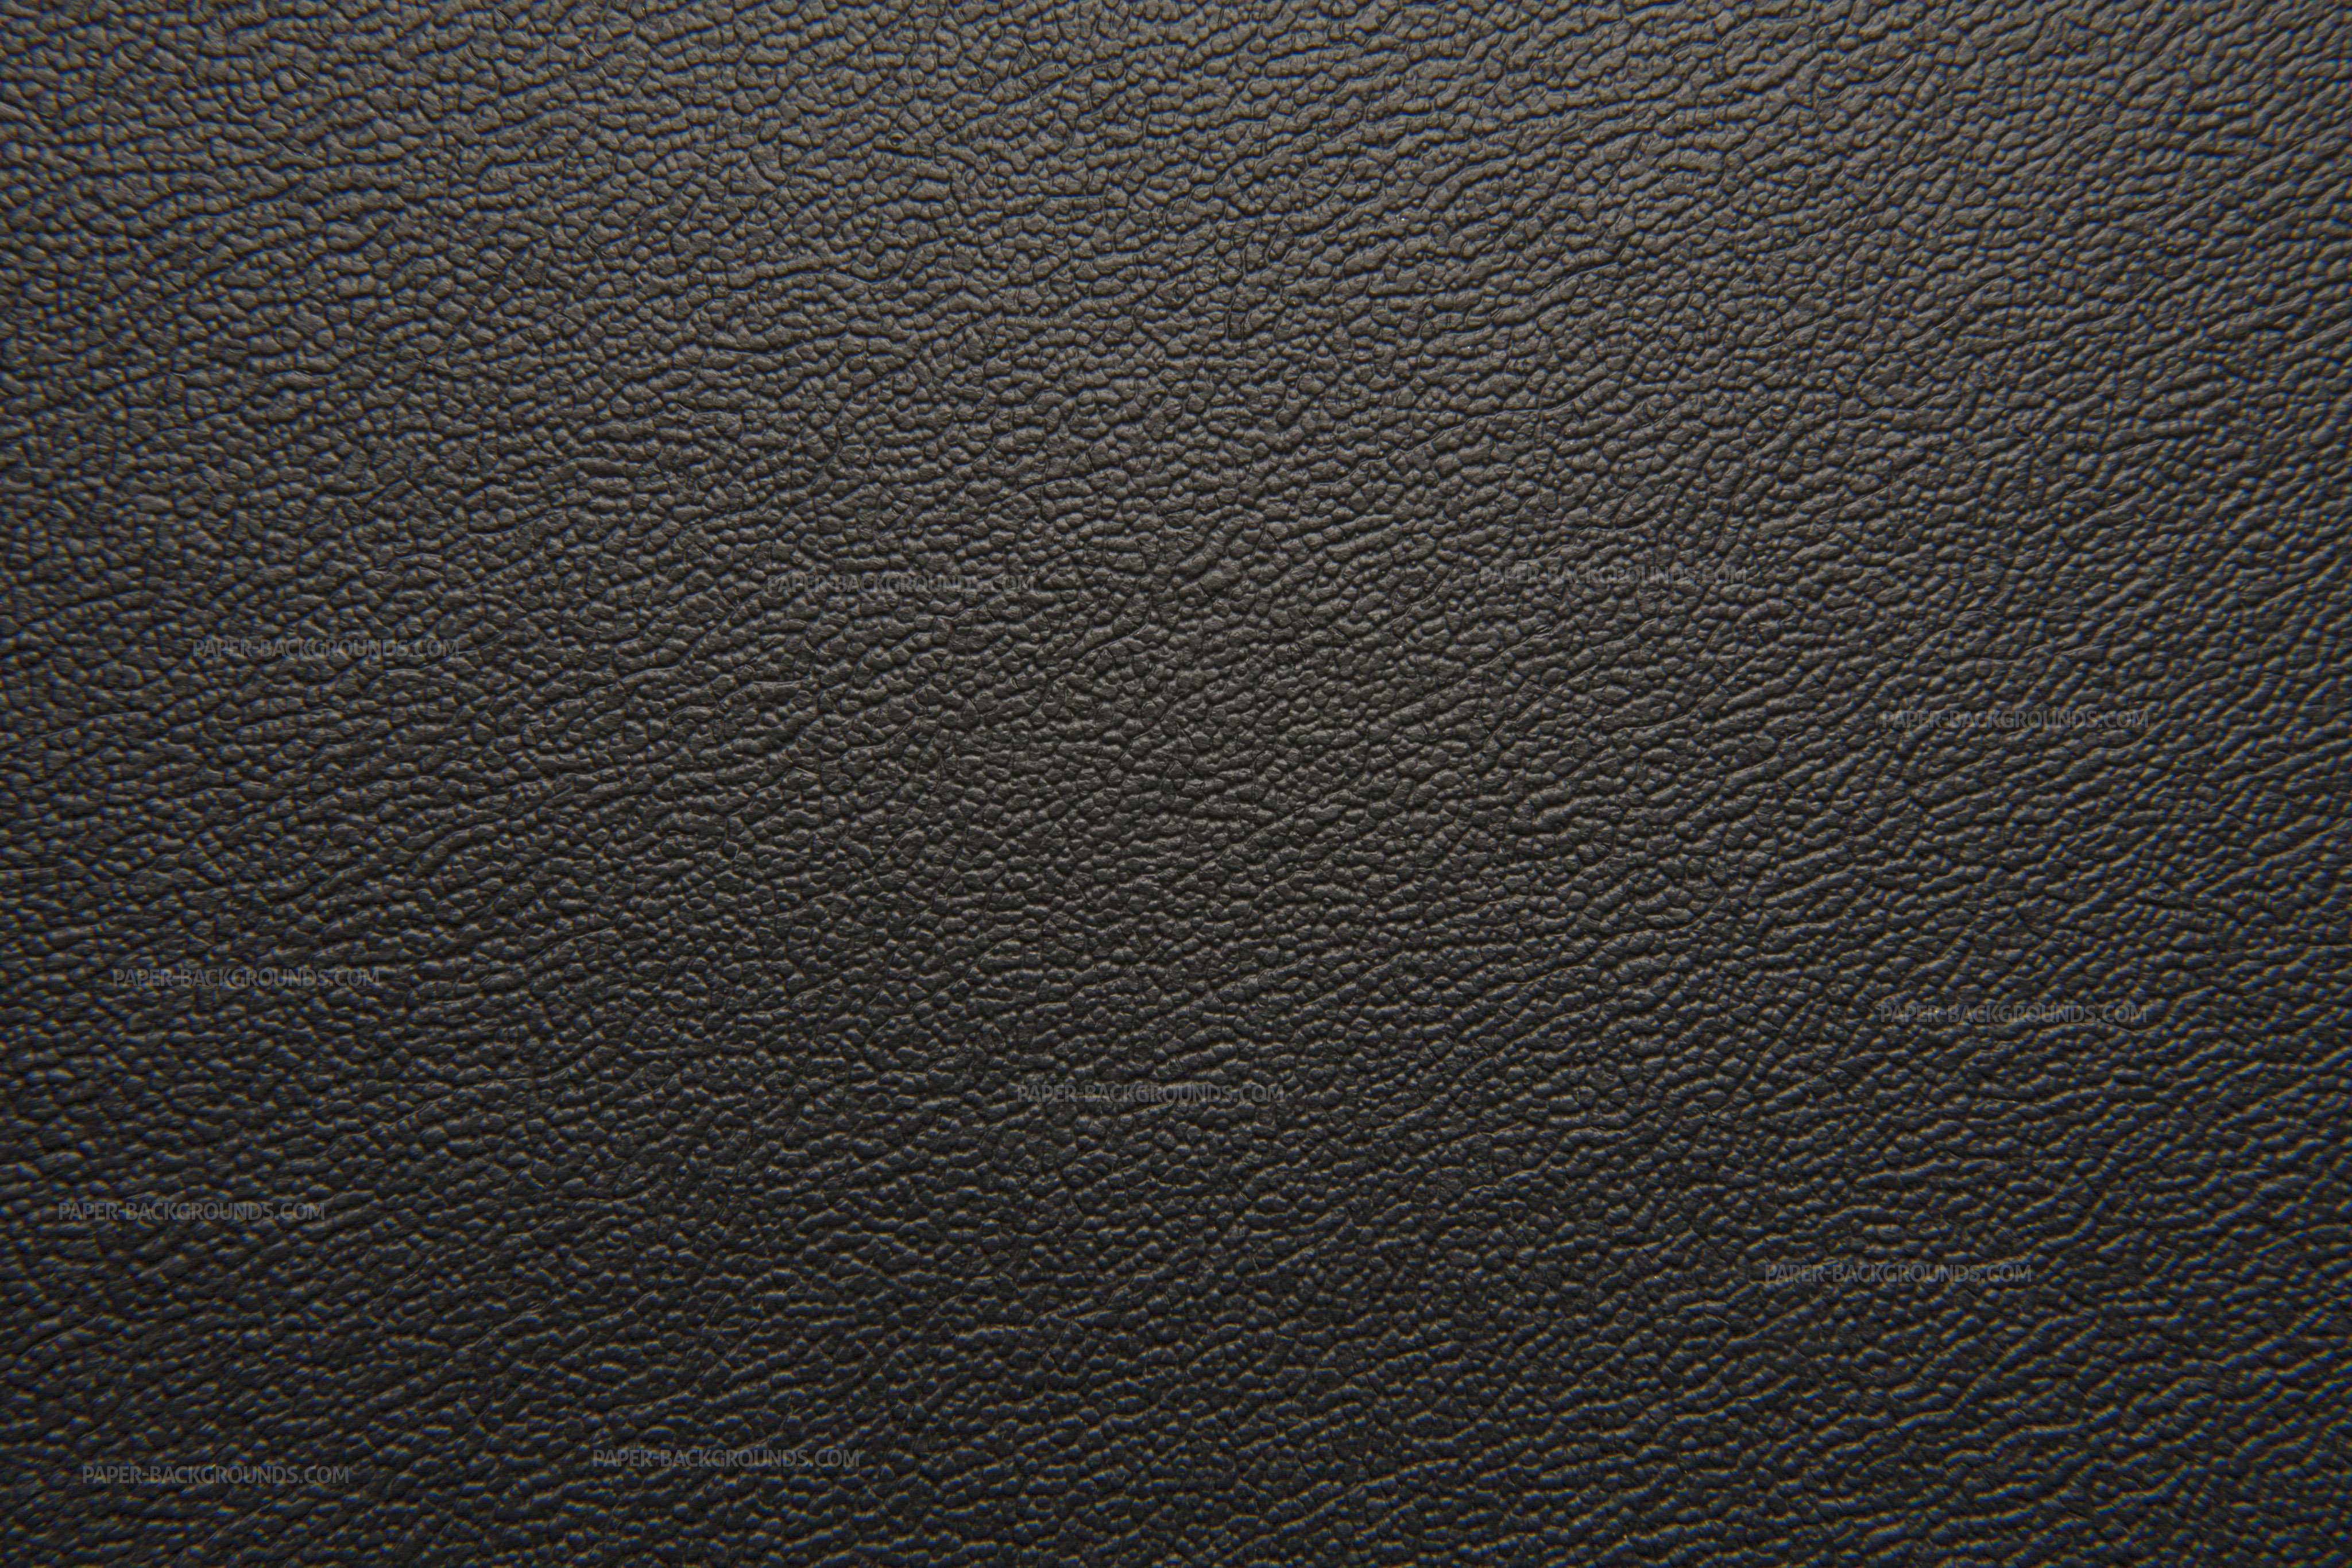 Black leather texture background high resolution 4096 x 2731 pixels